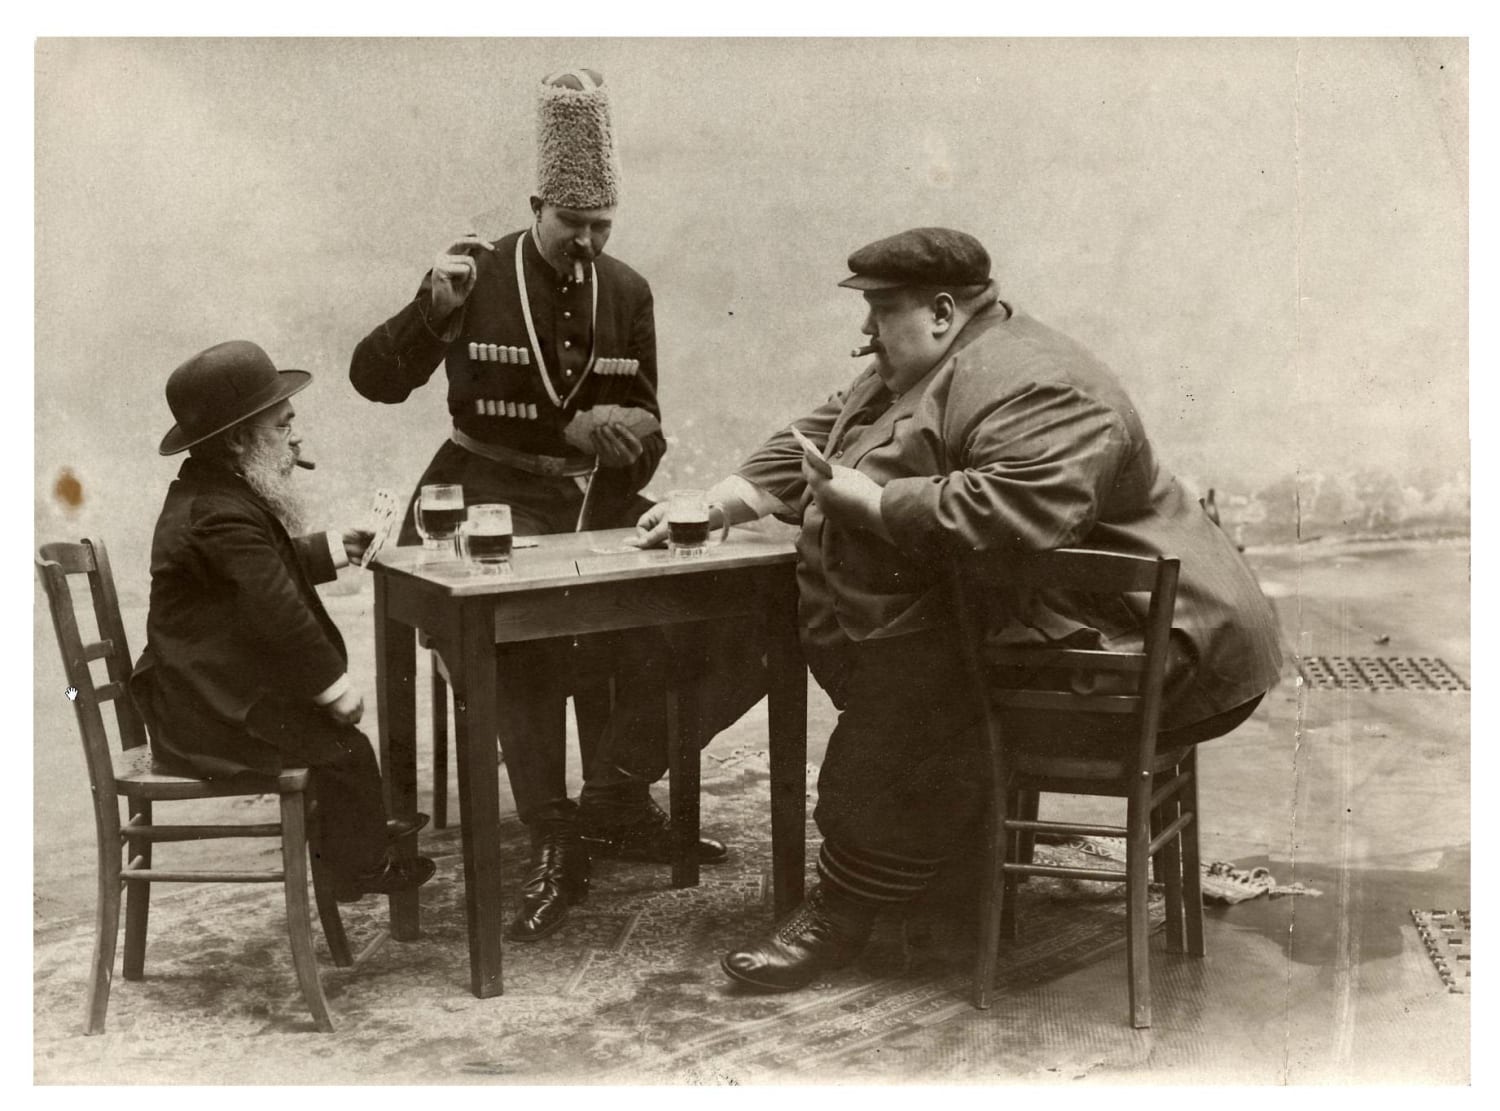 The tallest, shortest and fattest men in Europe play cards together, 1913.